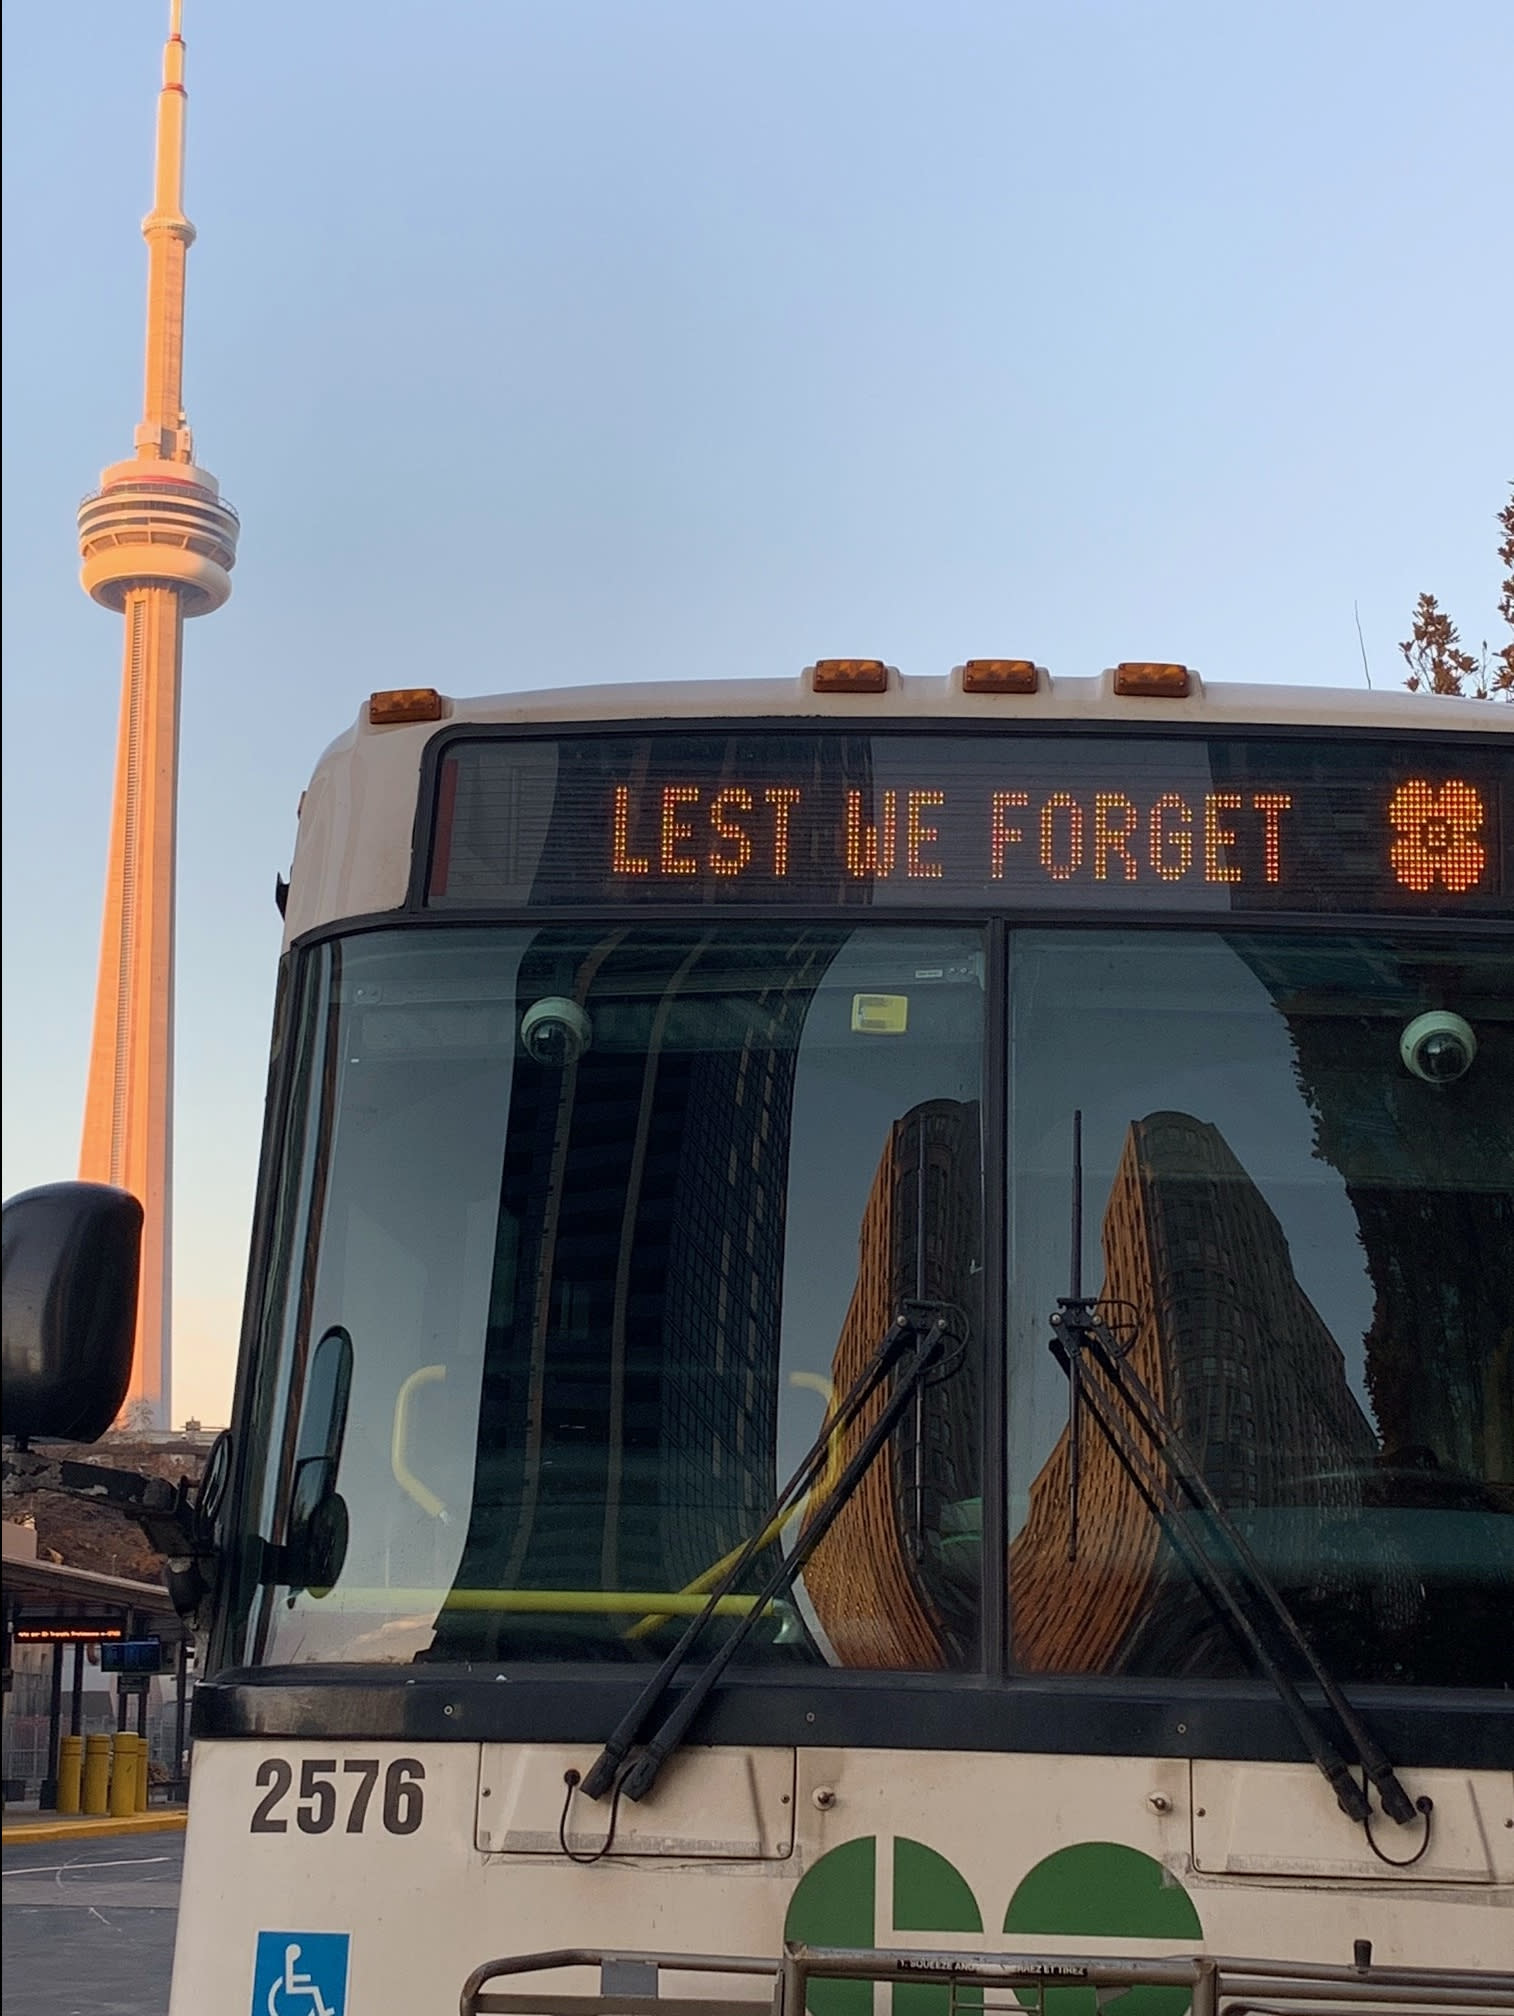 A bus sits parked with 'Lest we forget' across the digital display.